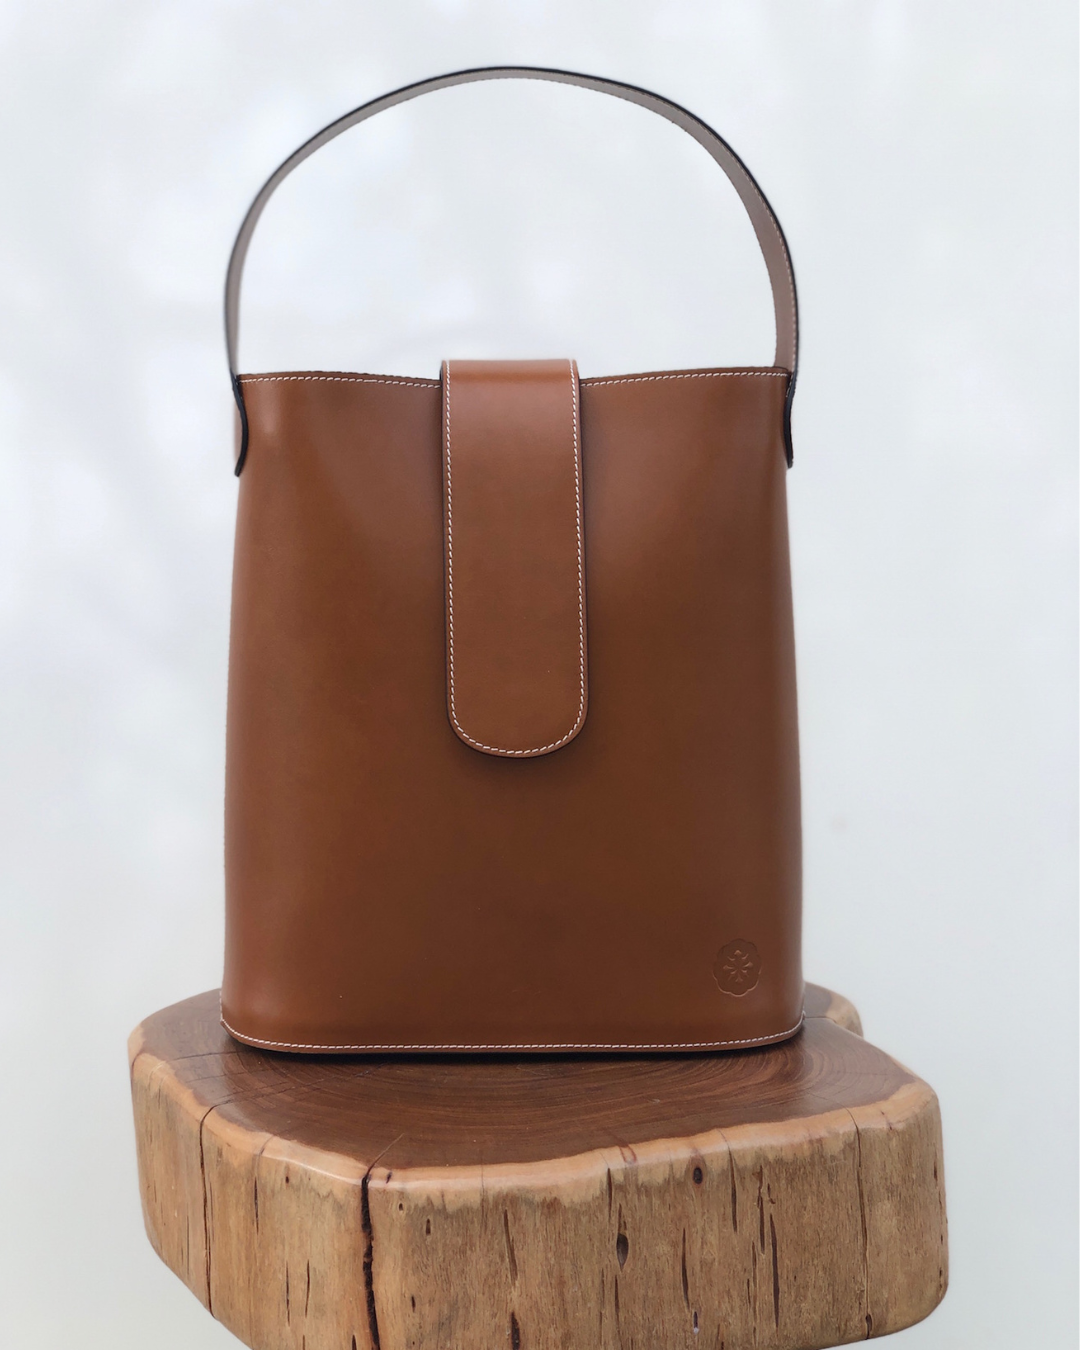 CNicol Brown Leather Holly Bag on top of Brown Wooden Log Slice